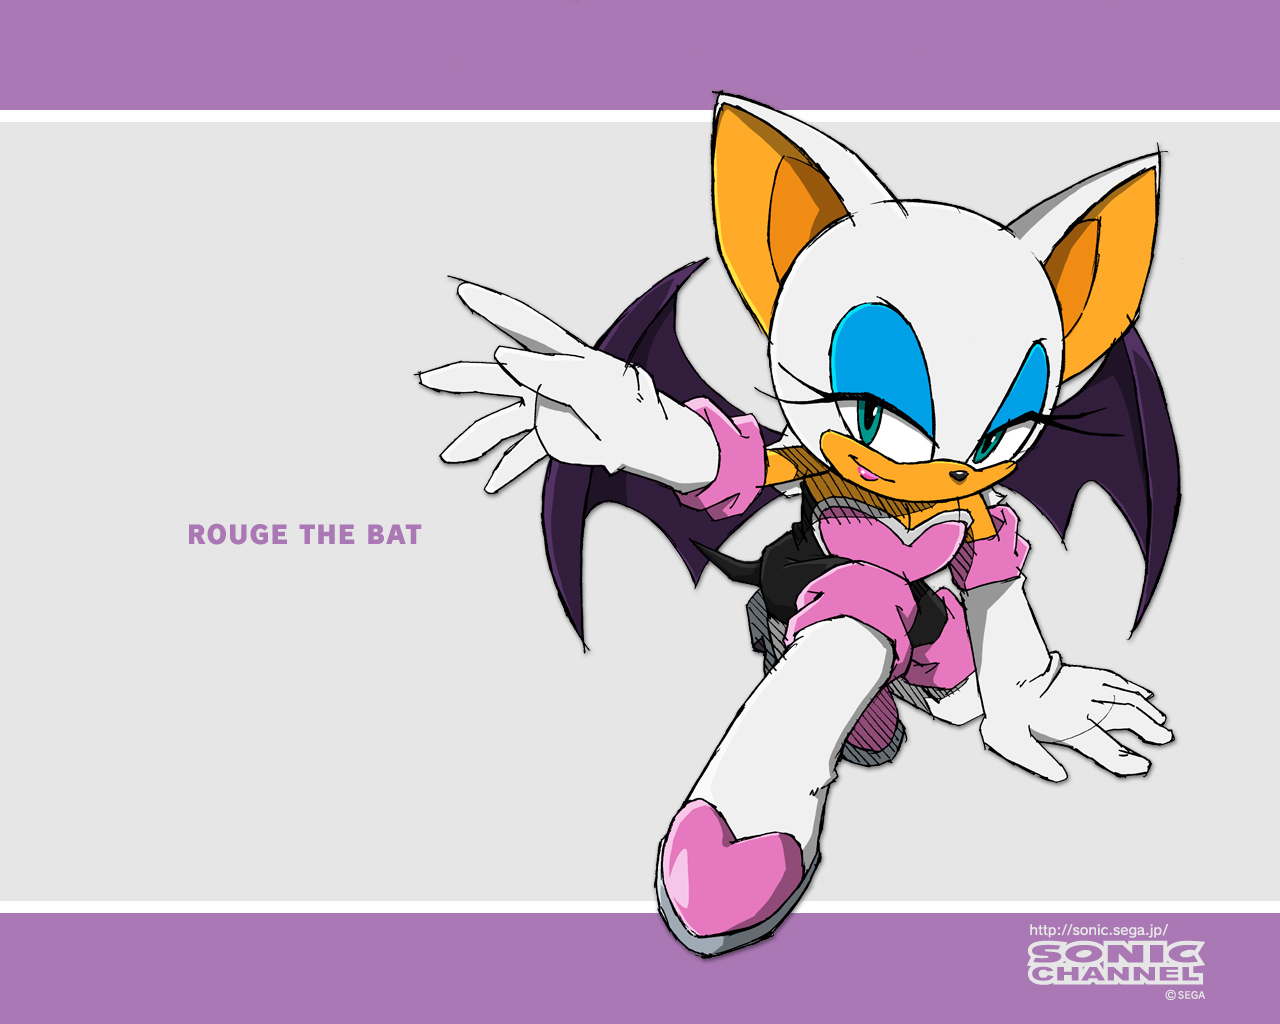 video game, rouge the bat, sonic the hedgehog